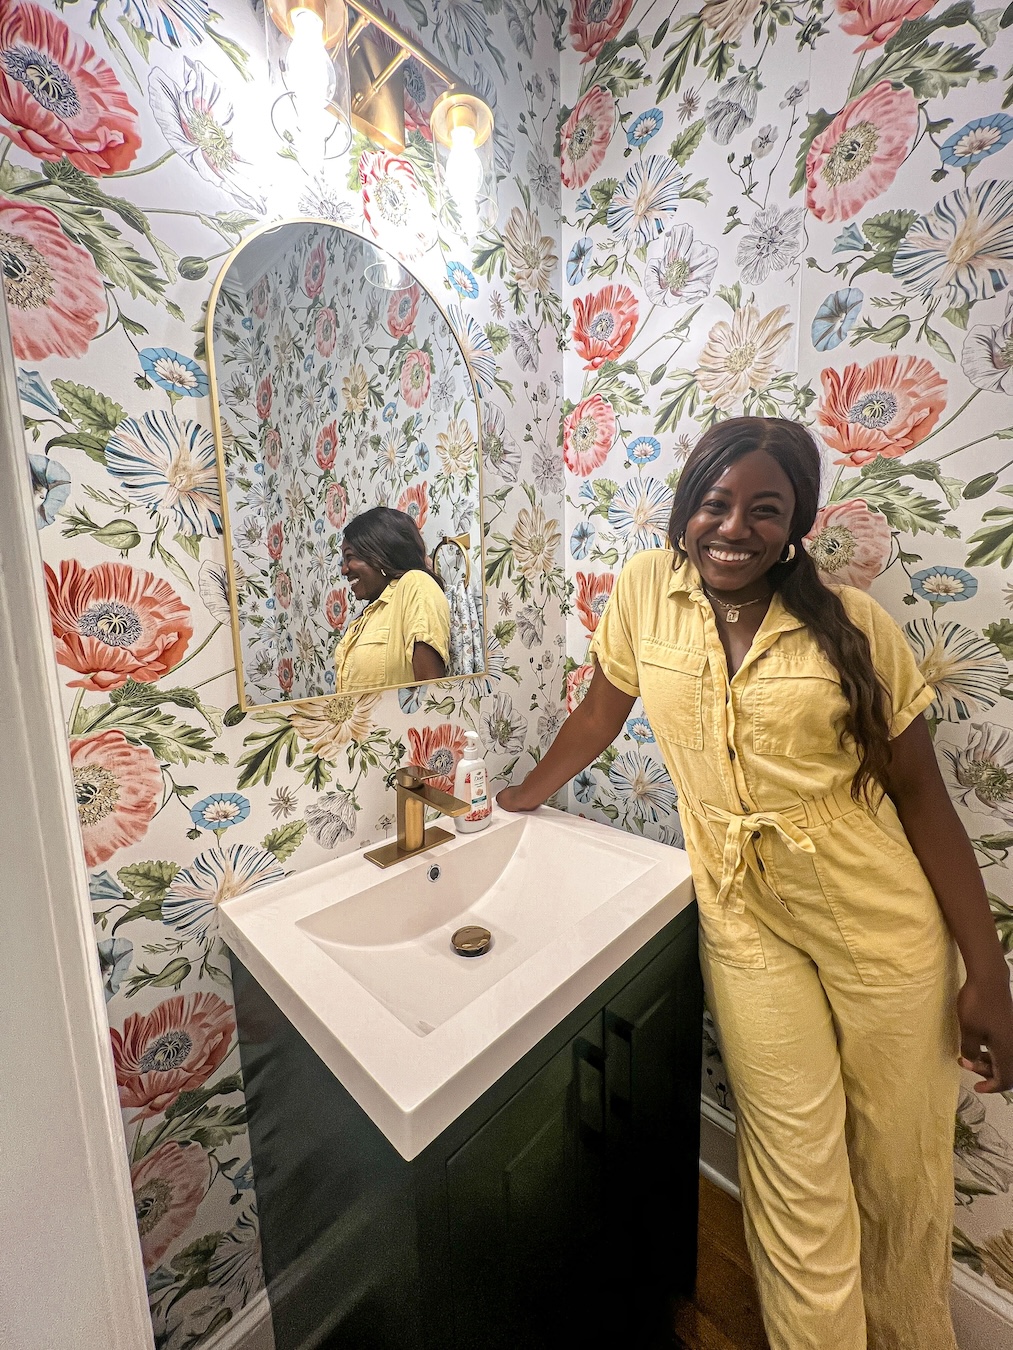 How to DIY half bath remodel for $500 | Tomi Obebe from GoodTomiCha.com shows you how